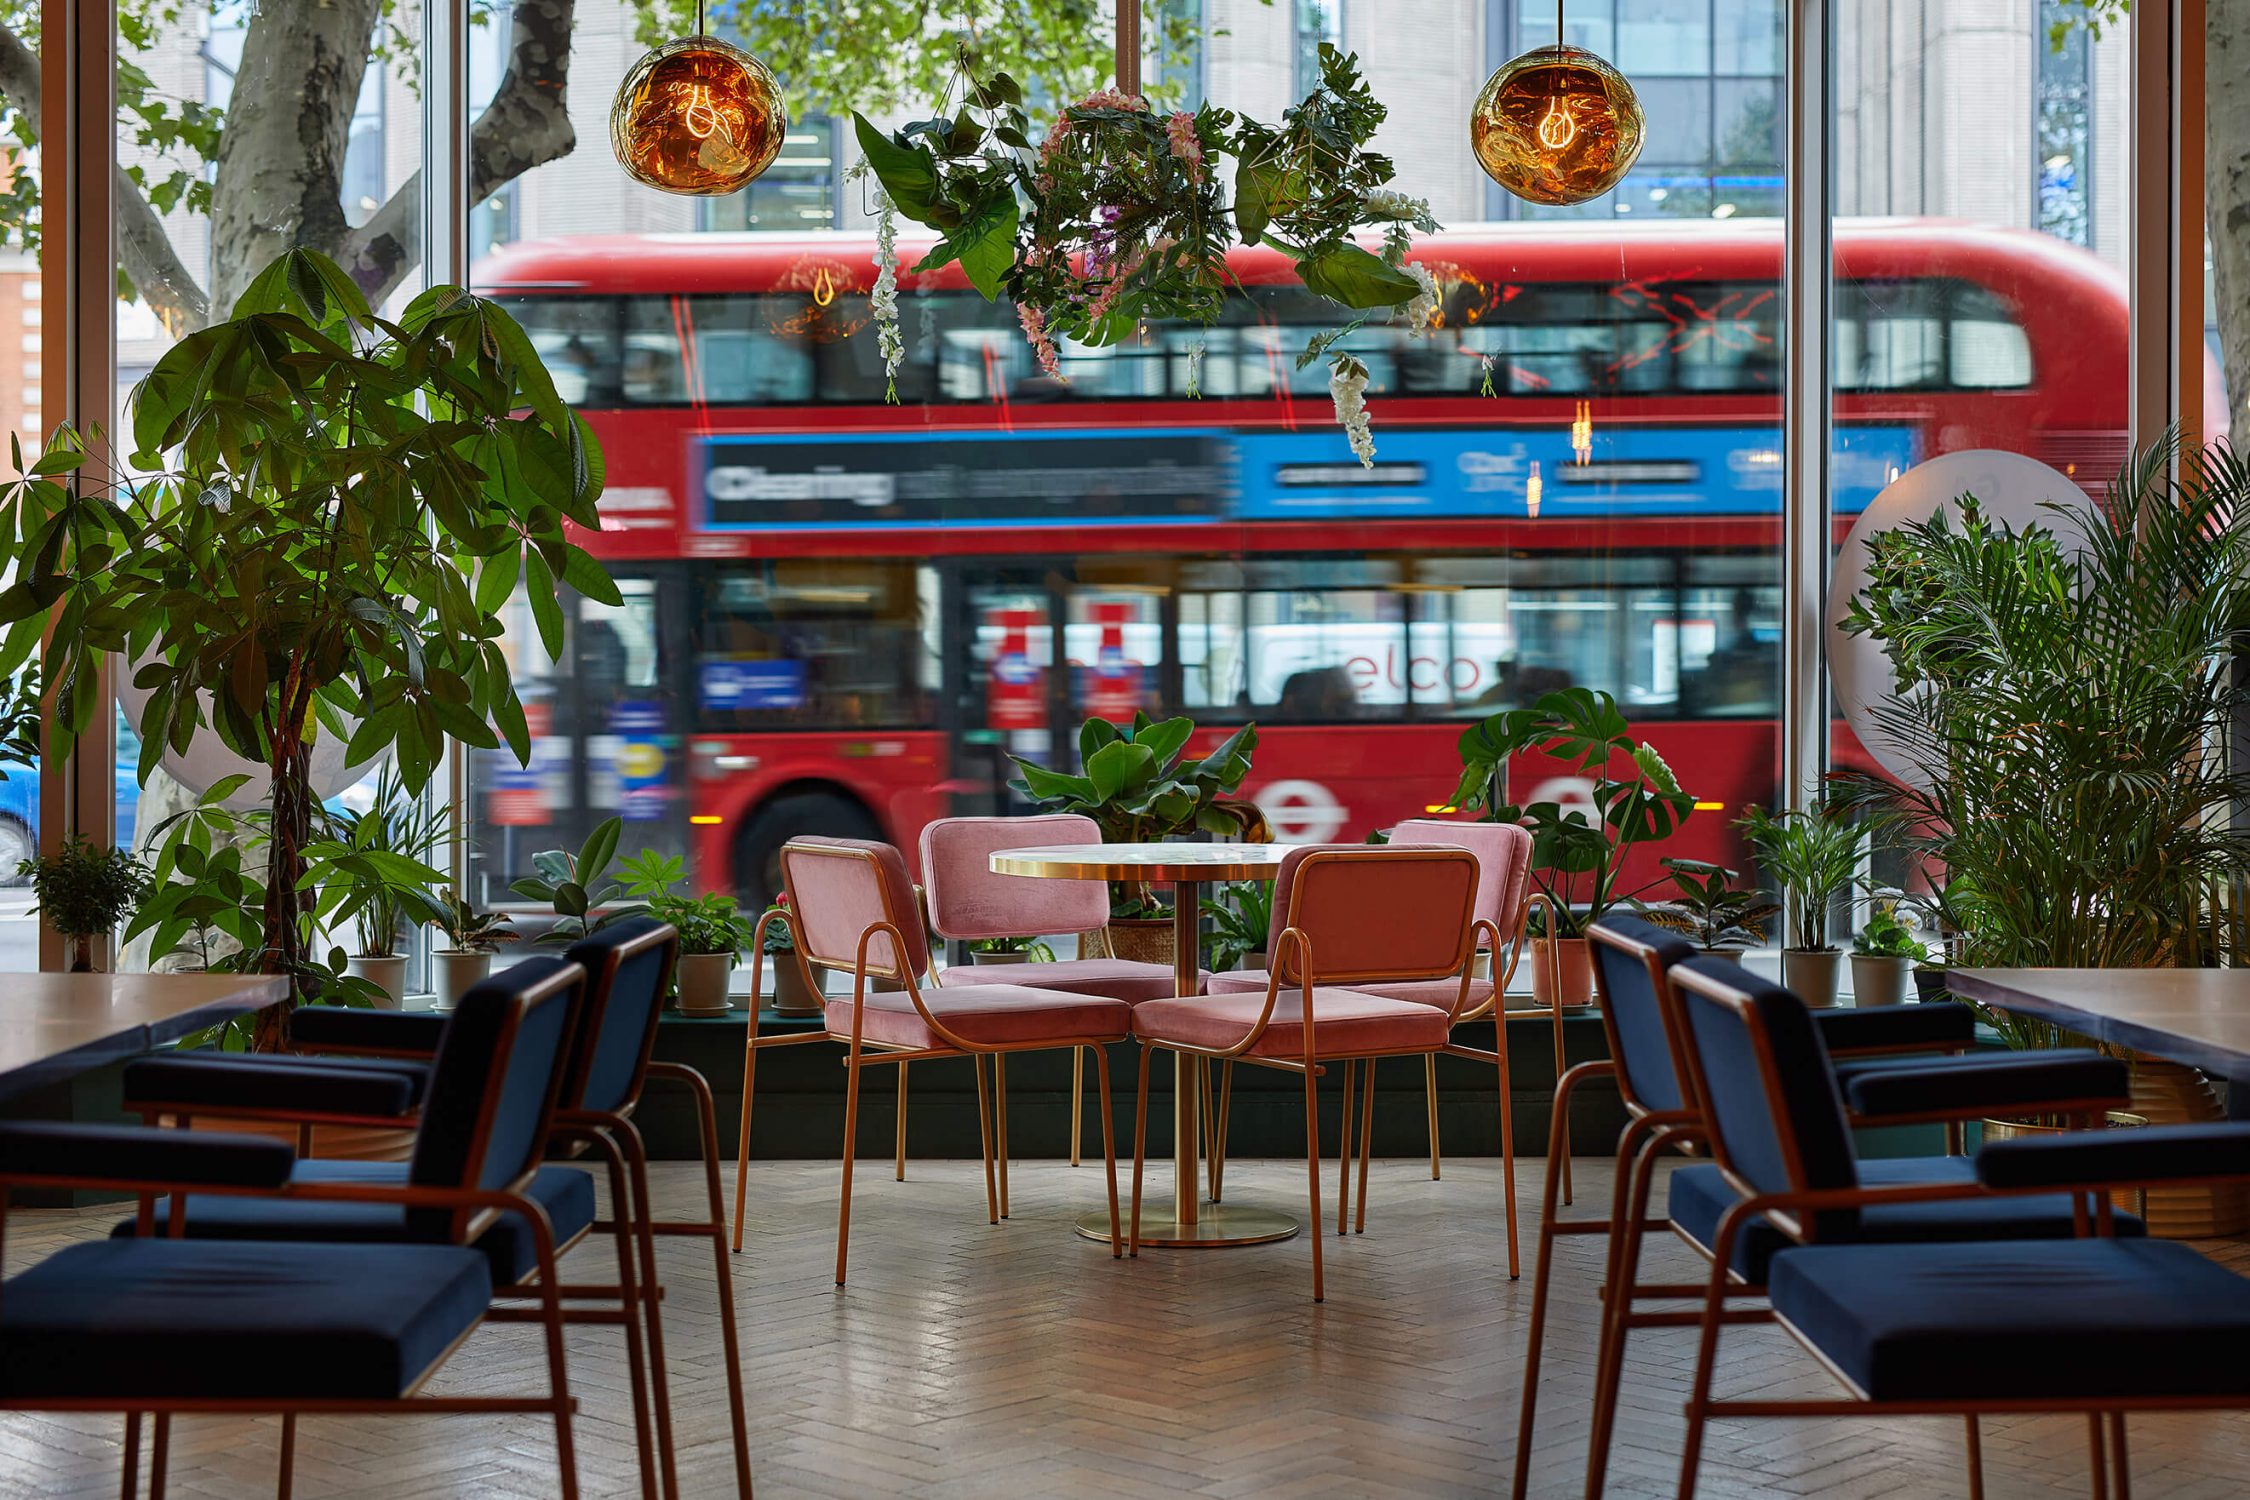 Large restaurant window view of red London bus